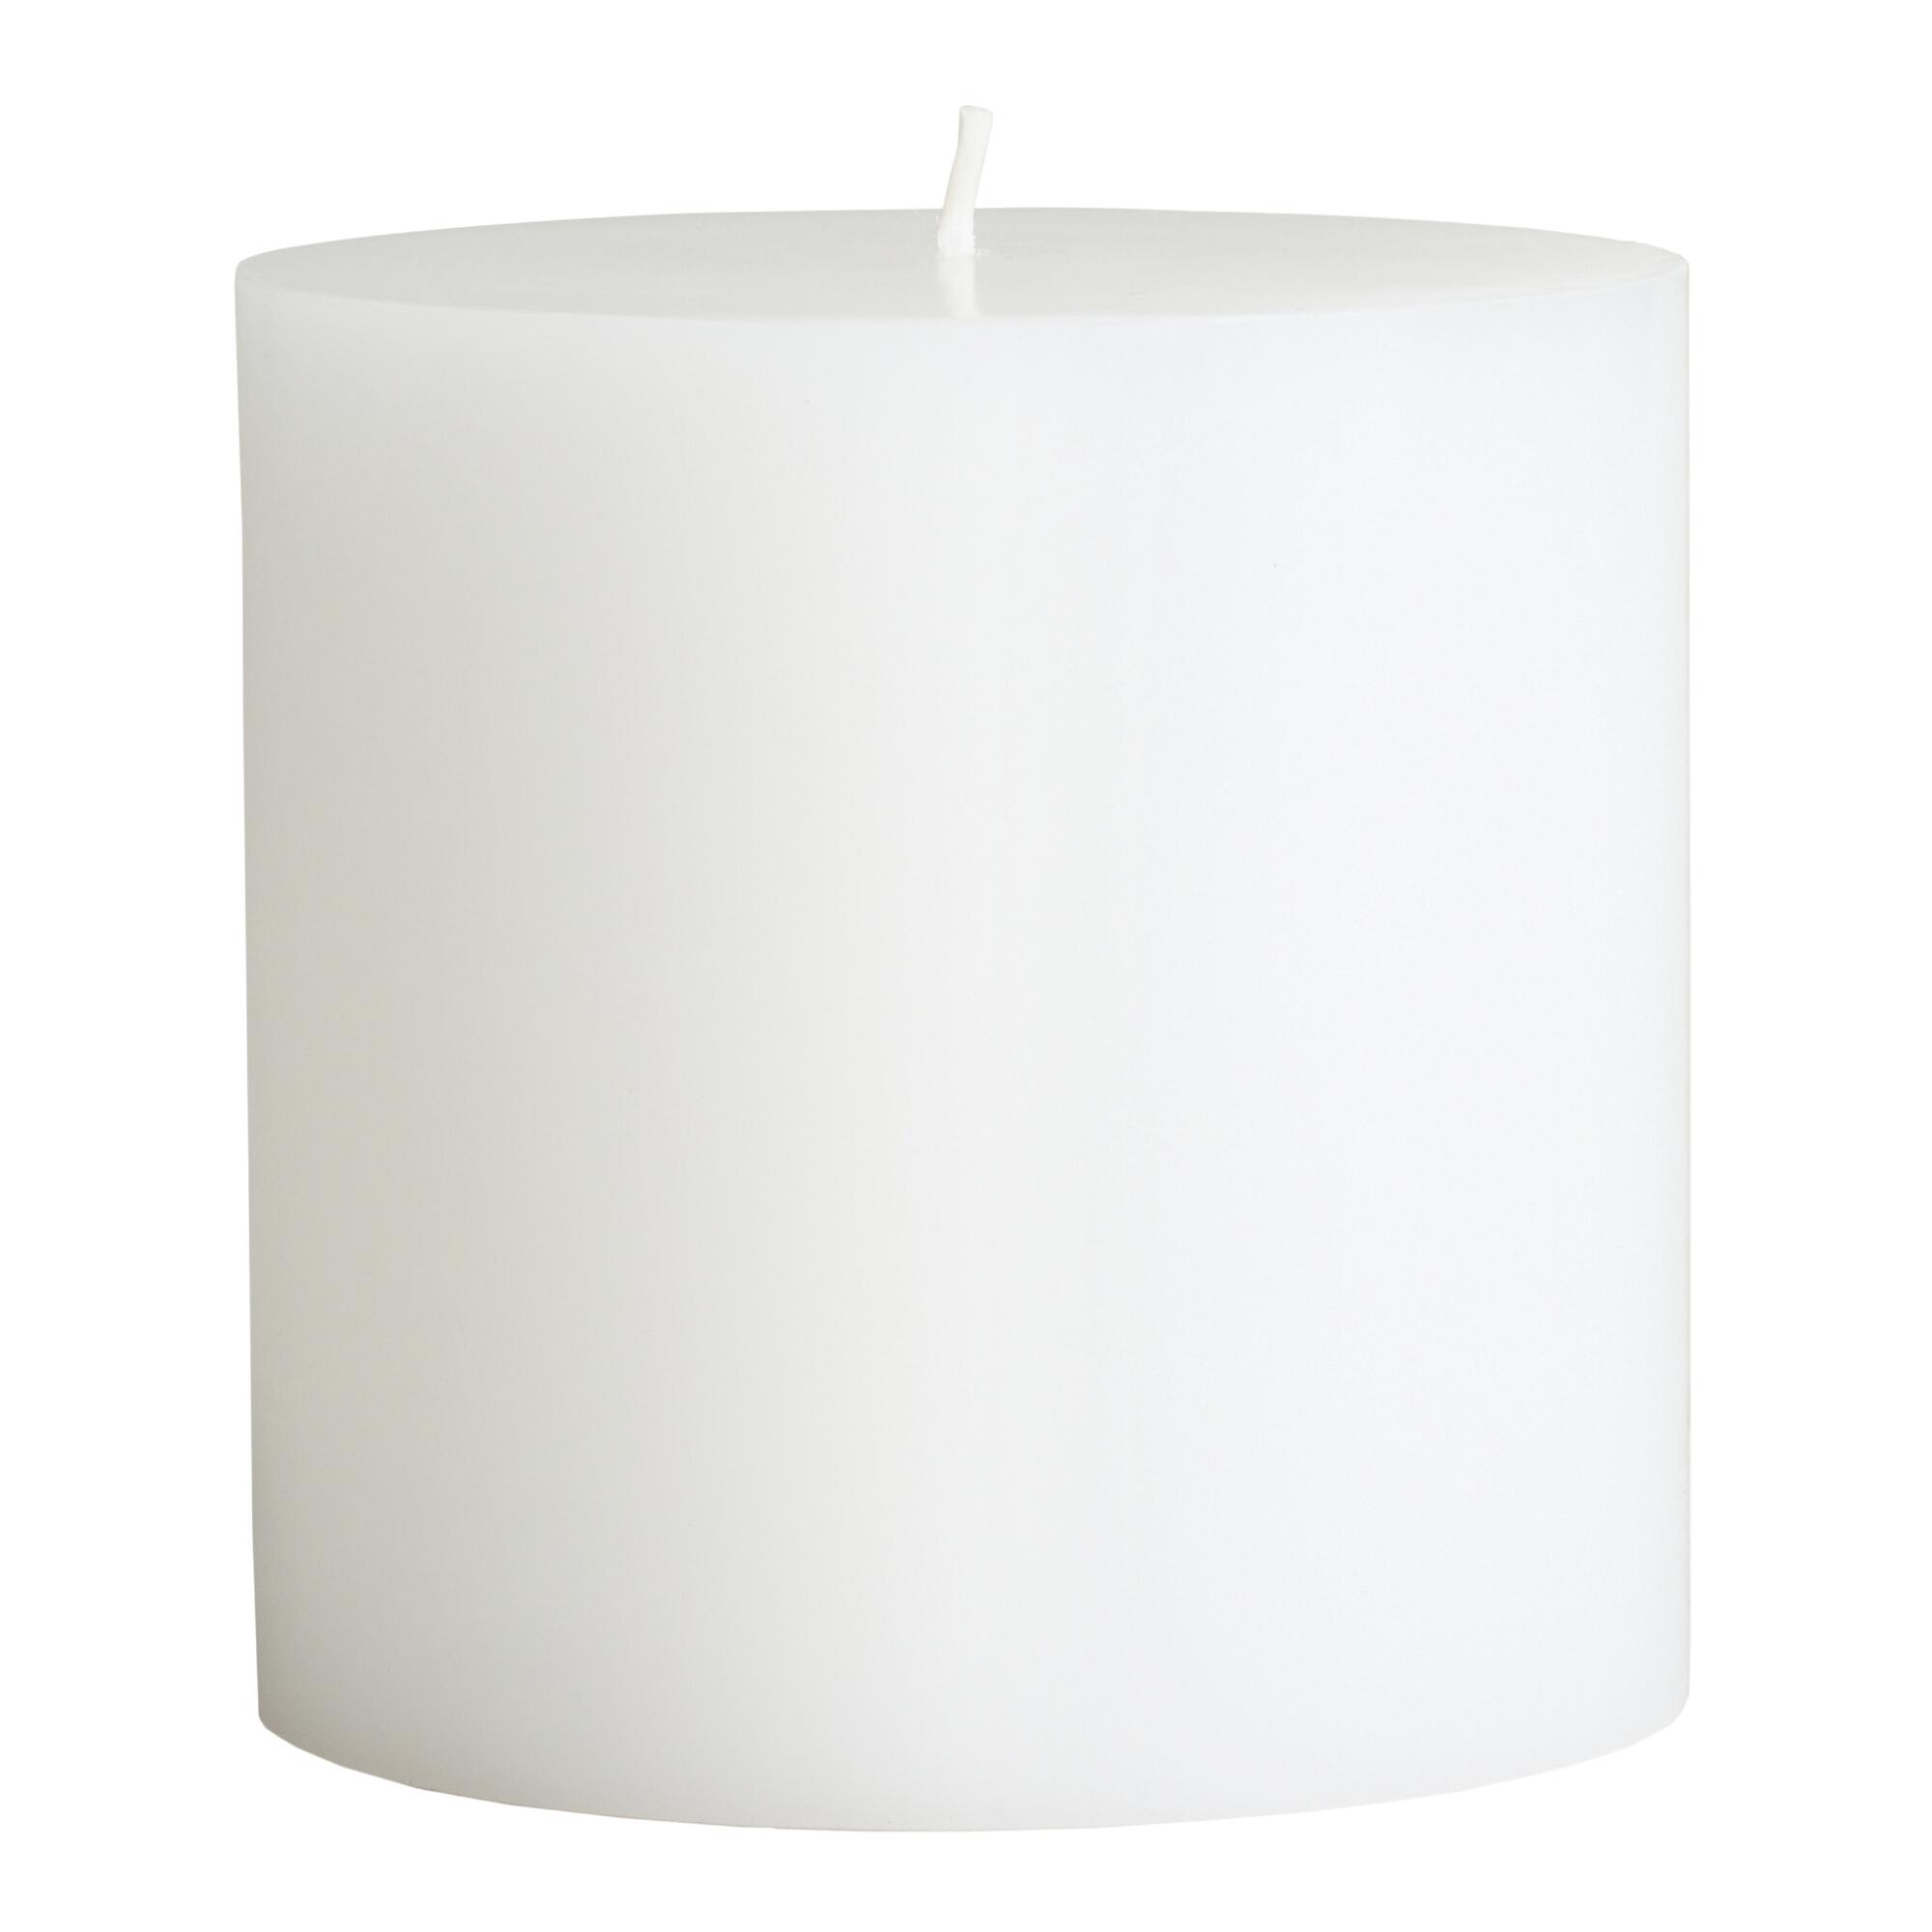 4x4 White Unscented Pillar Candle - Wax by World Market